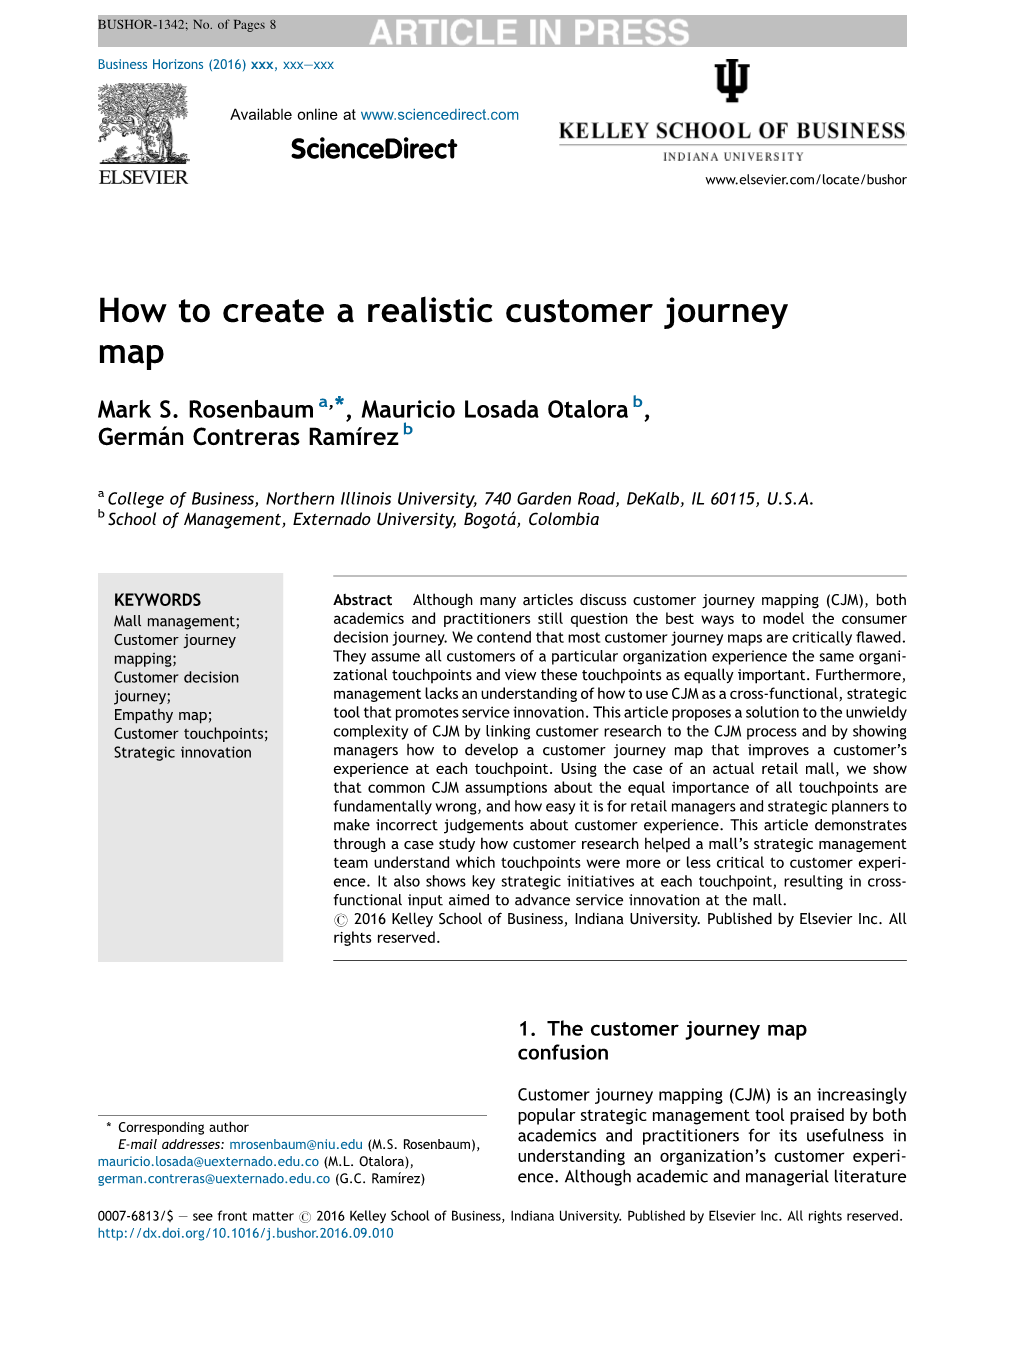 How to Create a Realistic Customer Journey Map